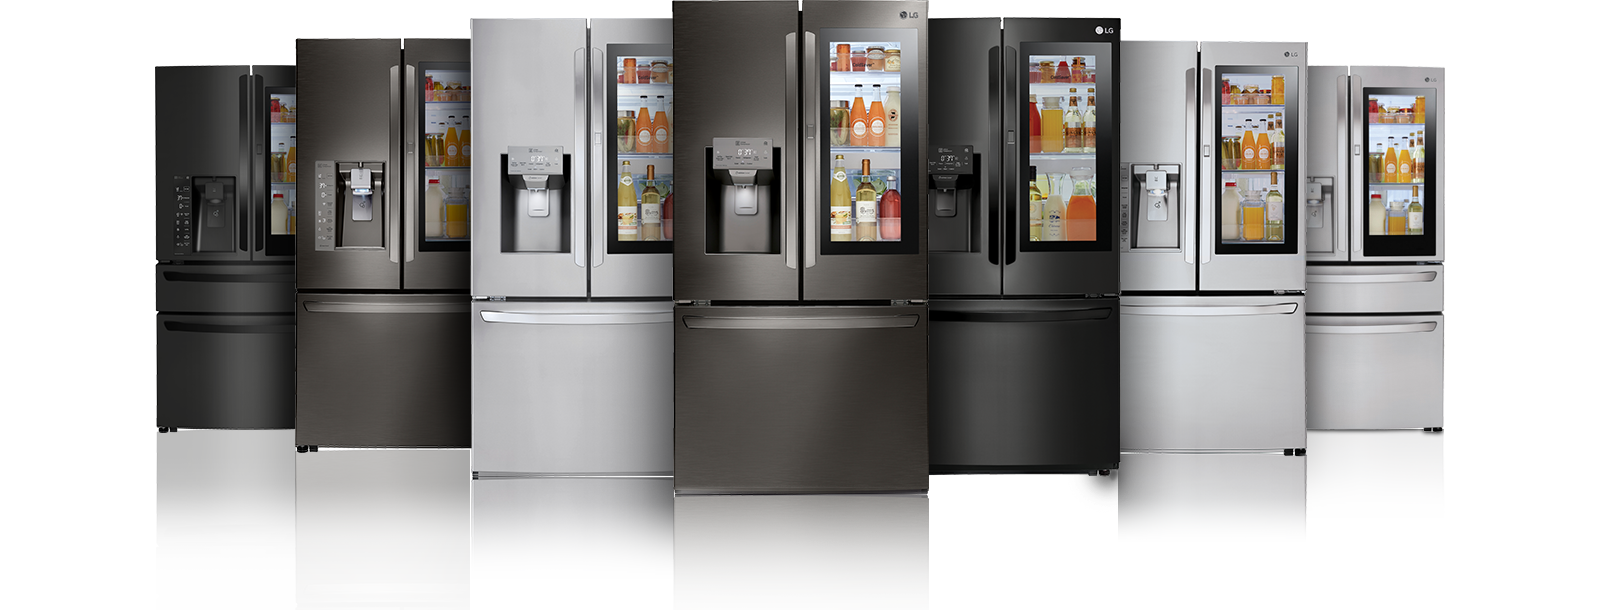 LG latest luxury refrigerator makes 'craft' ice balls, so take all our  money